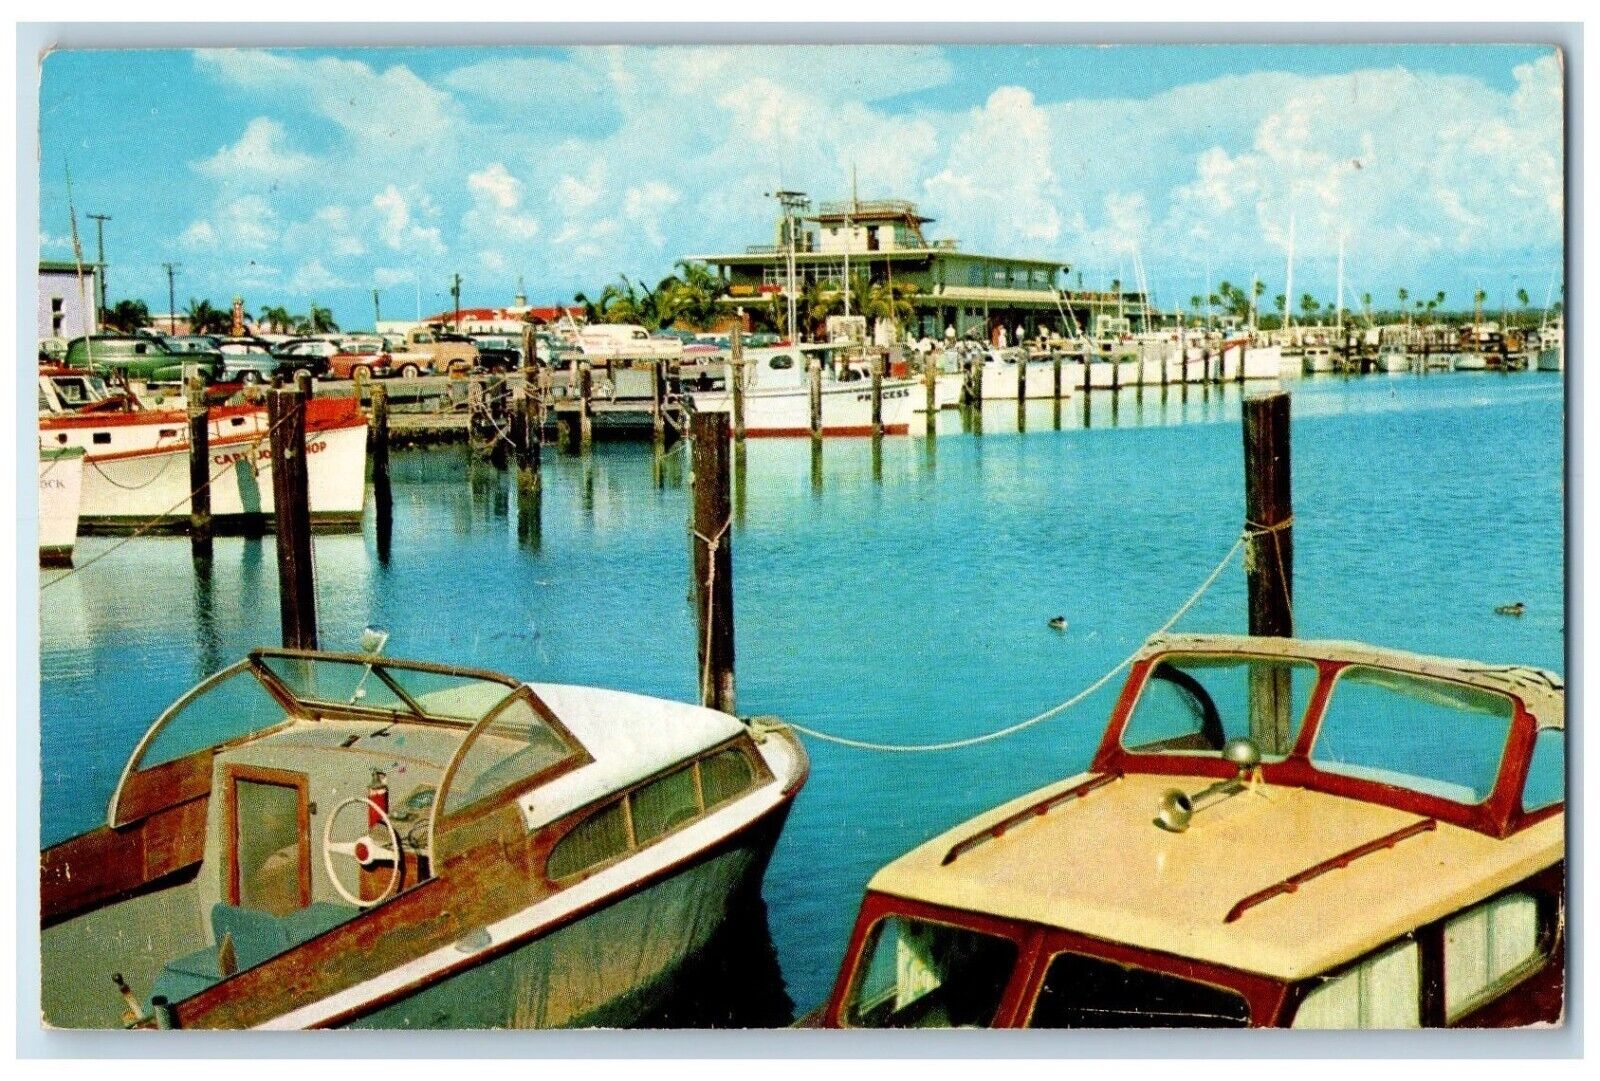 1960 The Magnificent Marina At Clearwater Beach Florida FL Vintage Postcard